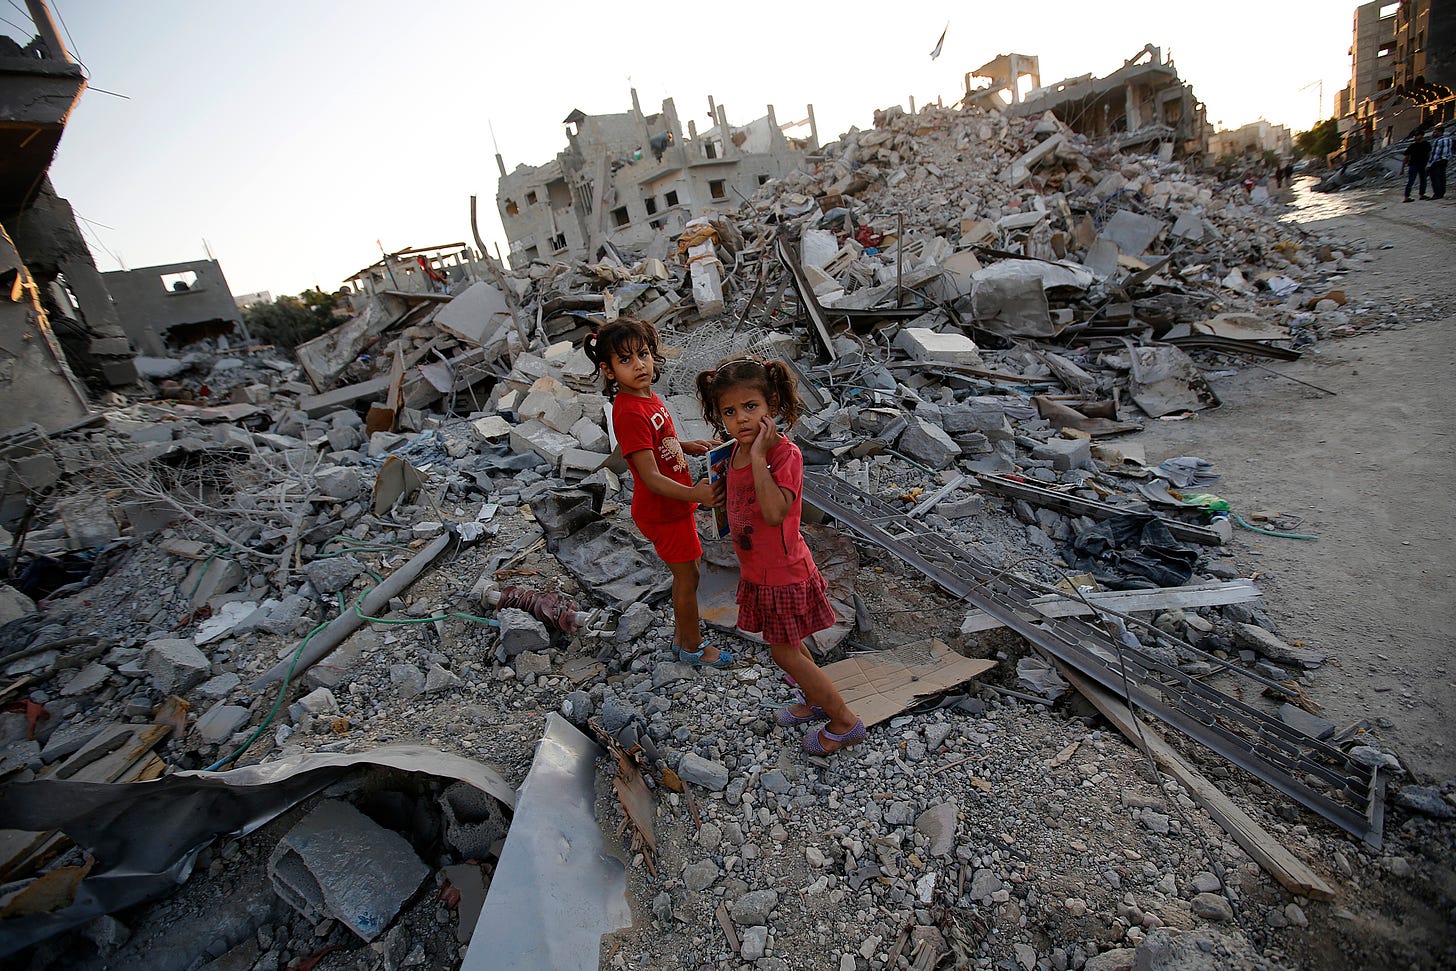 Two small Palestinian sisters standing inthe shocking afermath of heavy artillery and bombing.